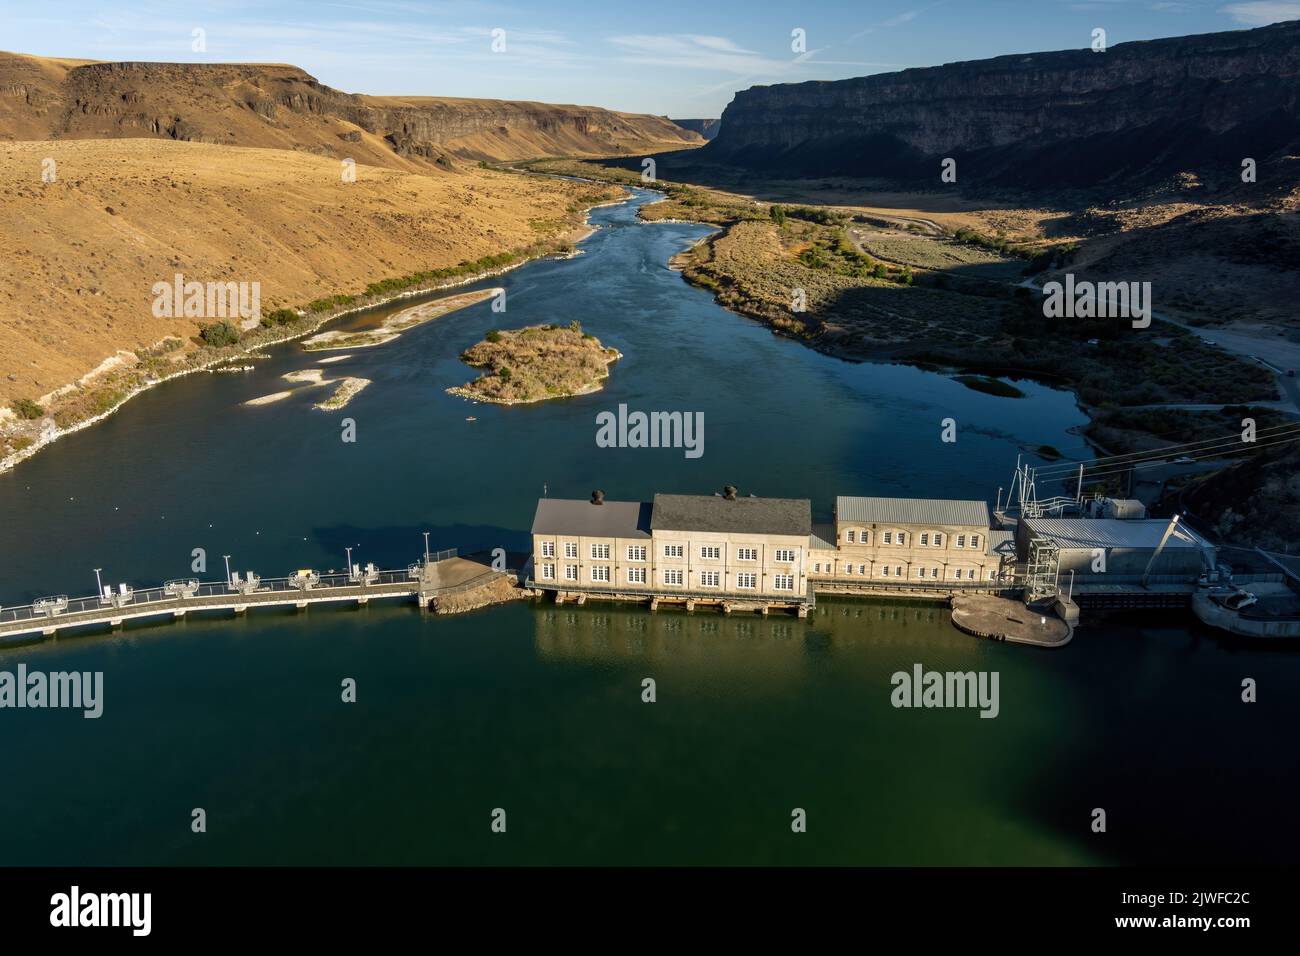 Beautiful view of Swan Falls Dam on the Snake River in Idaho Stock Photo